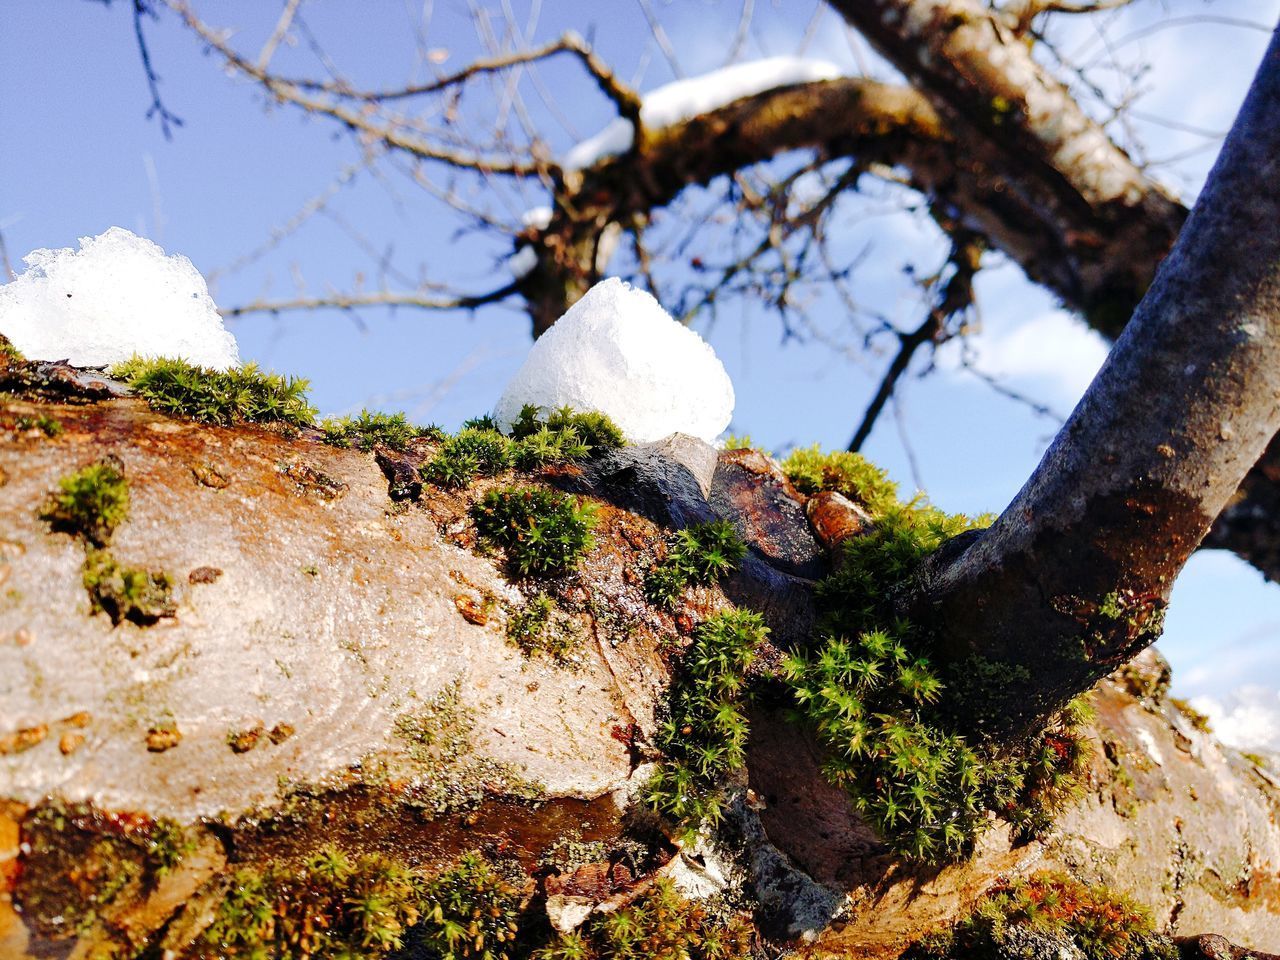 LOW ANGLE VIEW OF LICHEN ON TREE TRUNK